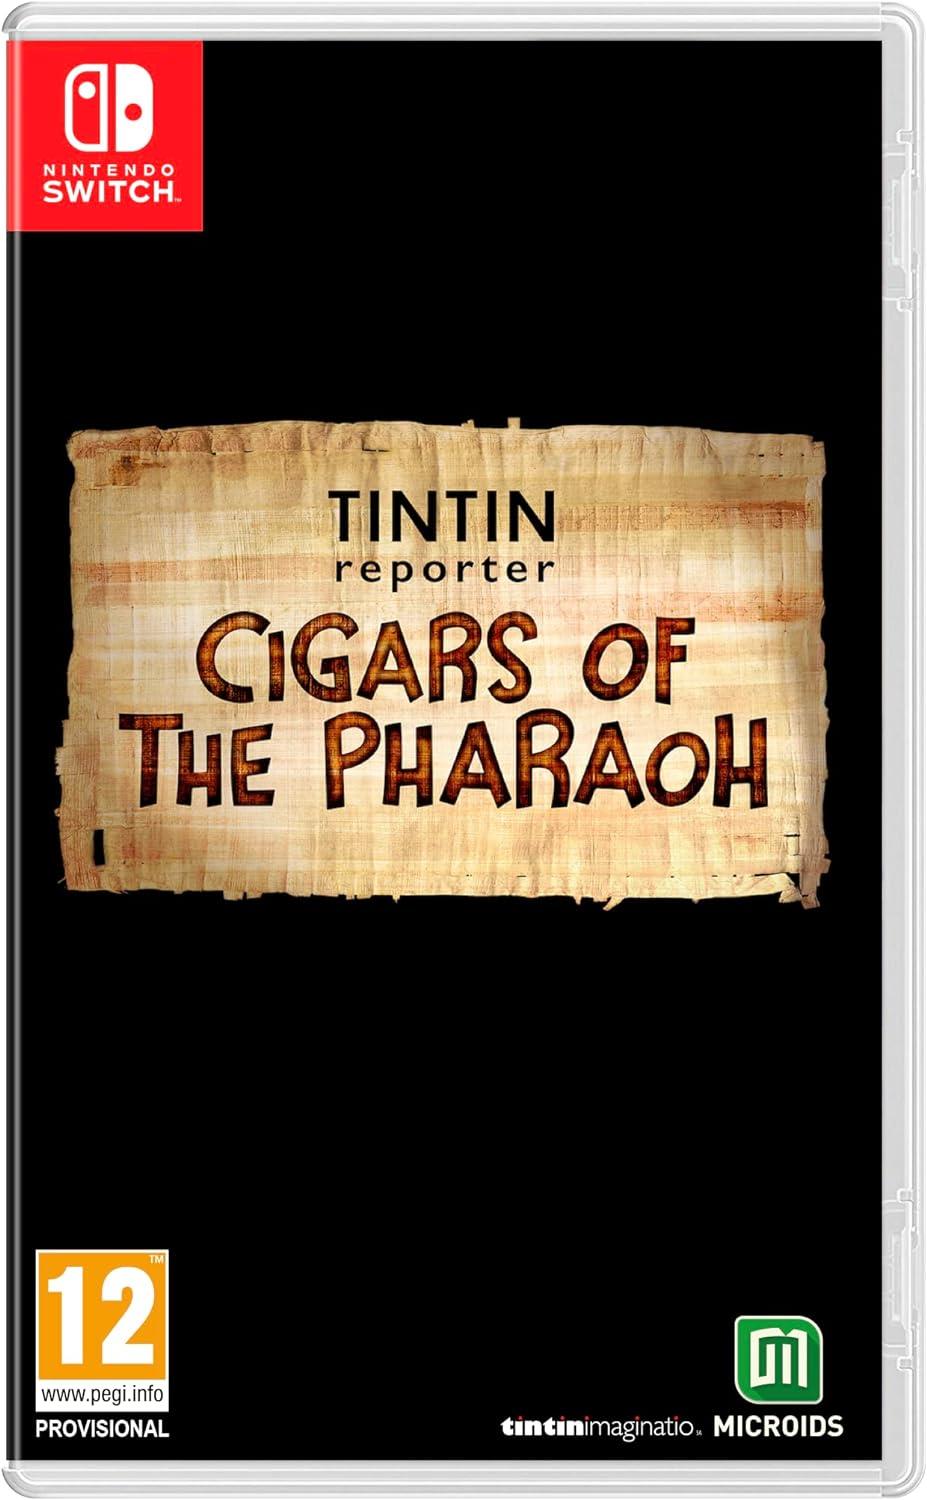 Tintin Reporter: Cigars of the Pharaoh Limited Edition Nintendo Switch Game